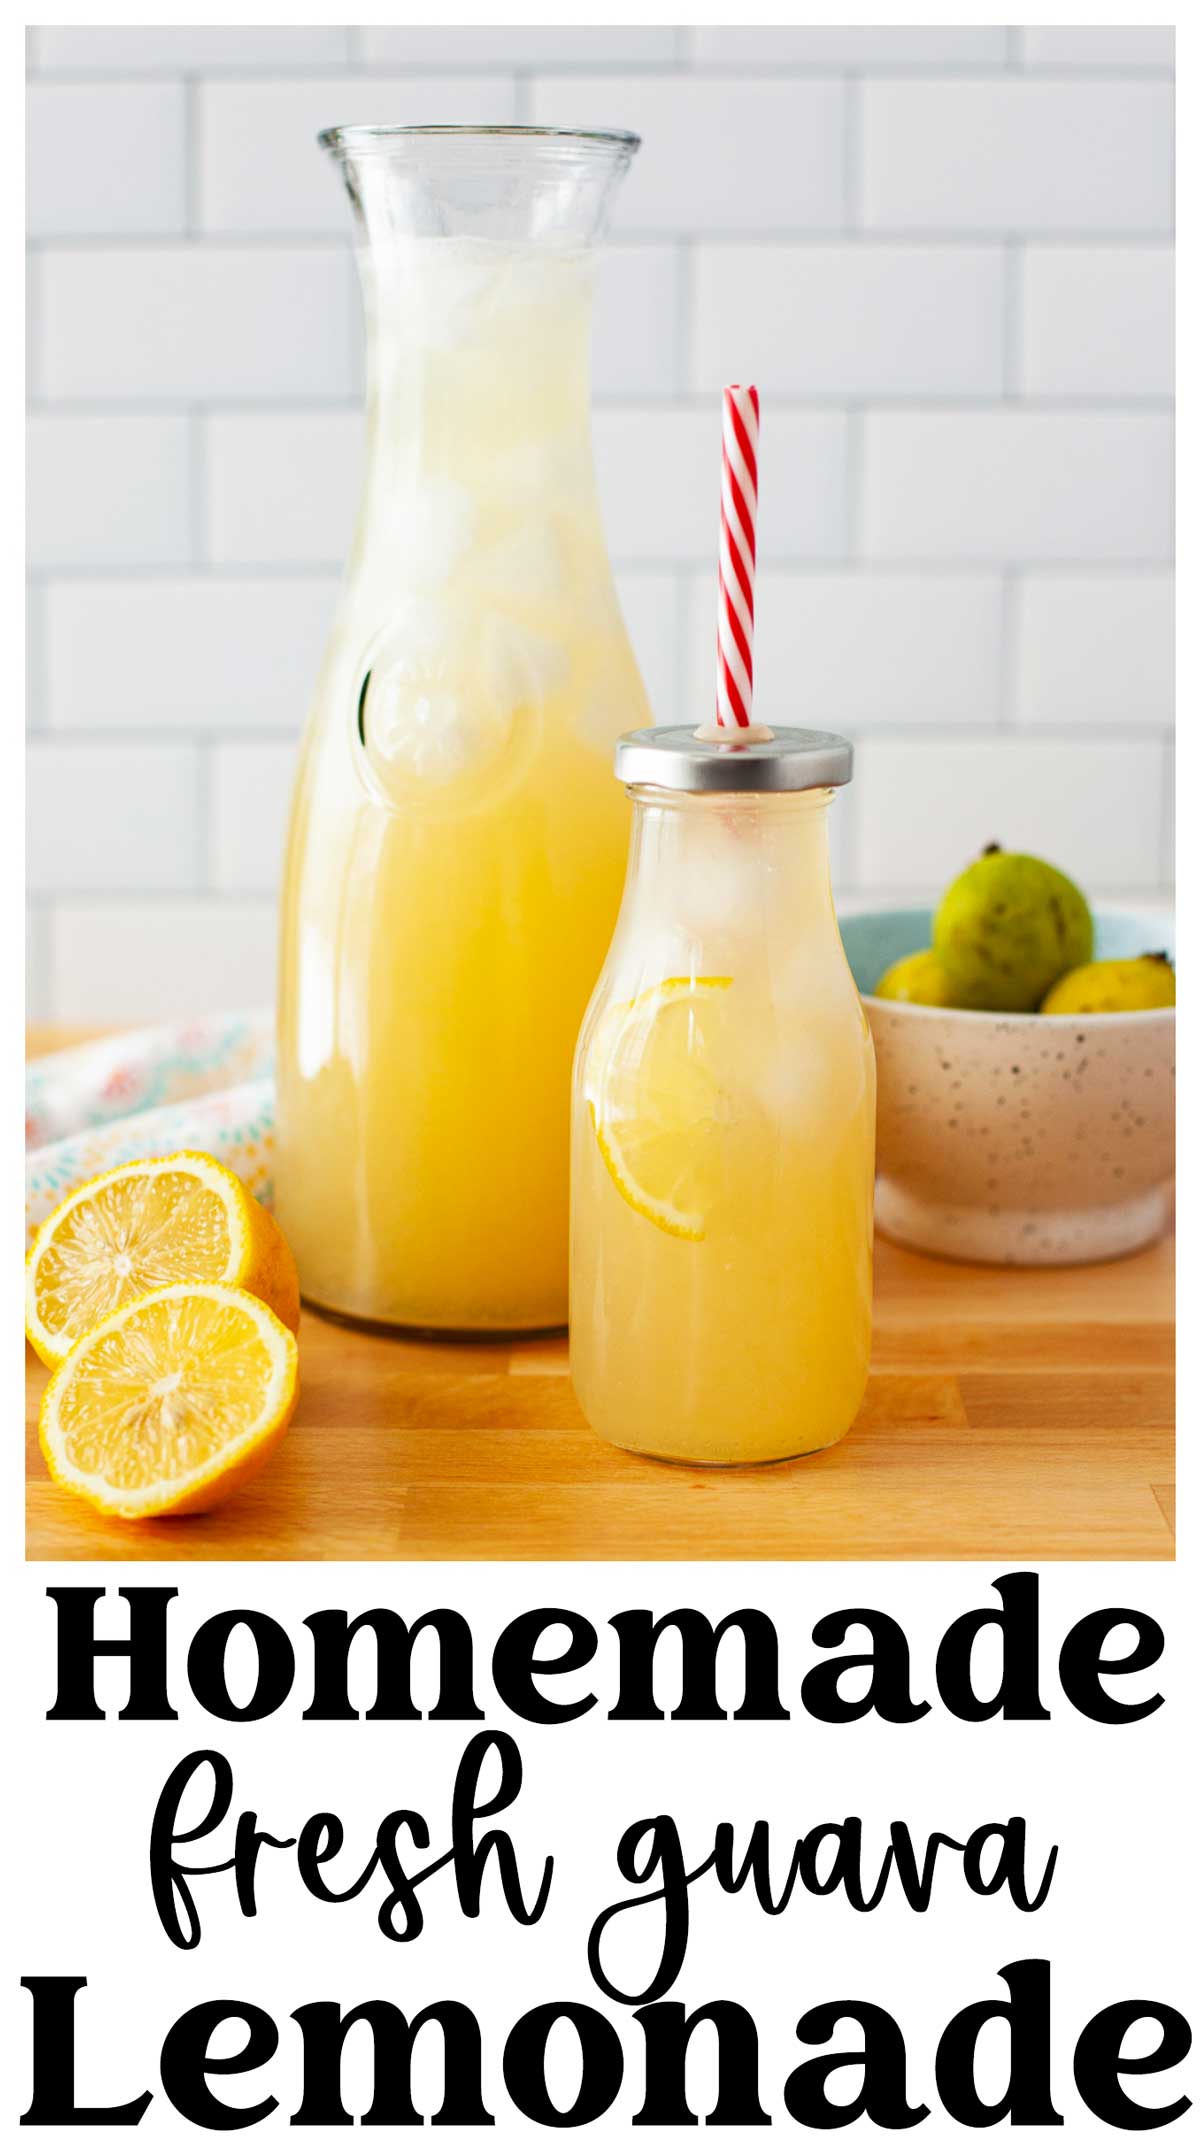 photo of glass carafe with guava lemonade in it and text overlay.